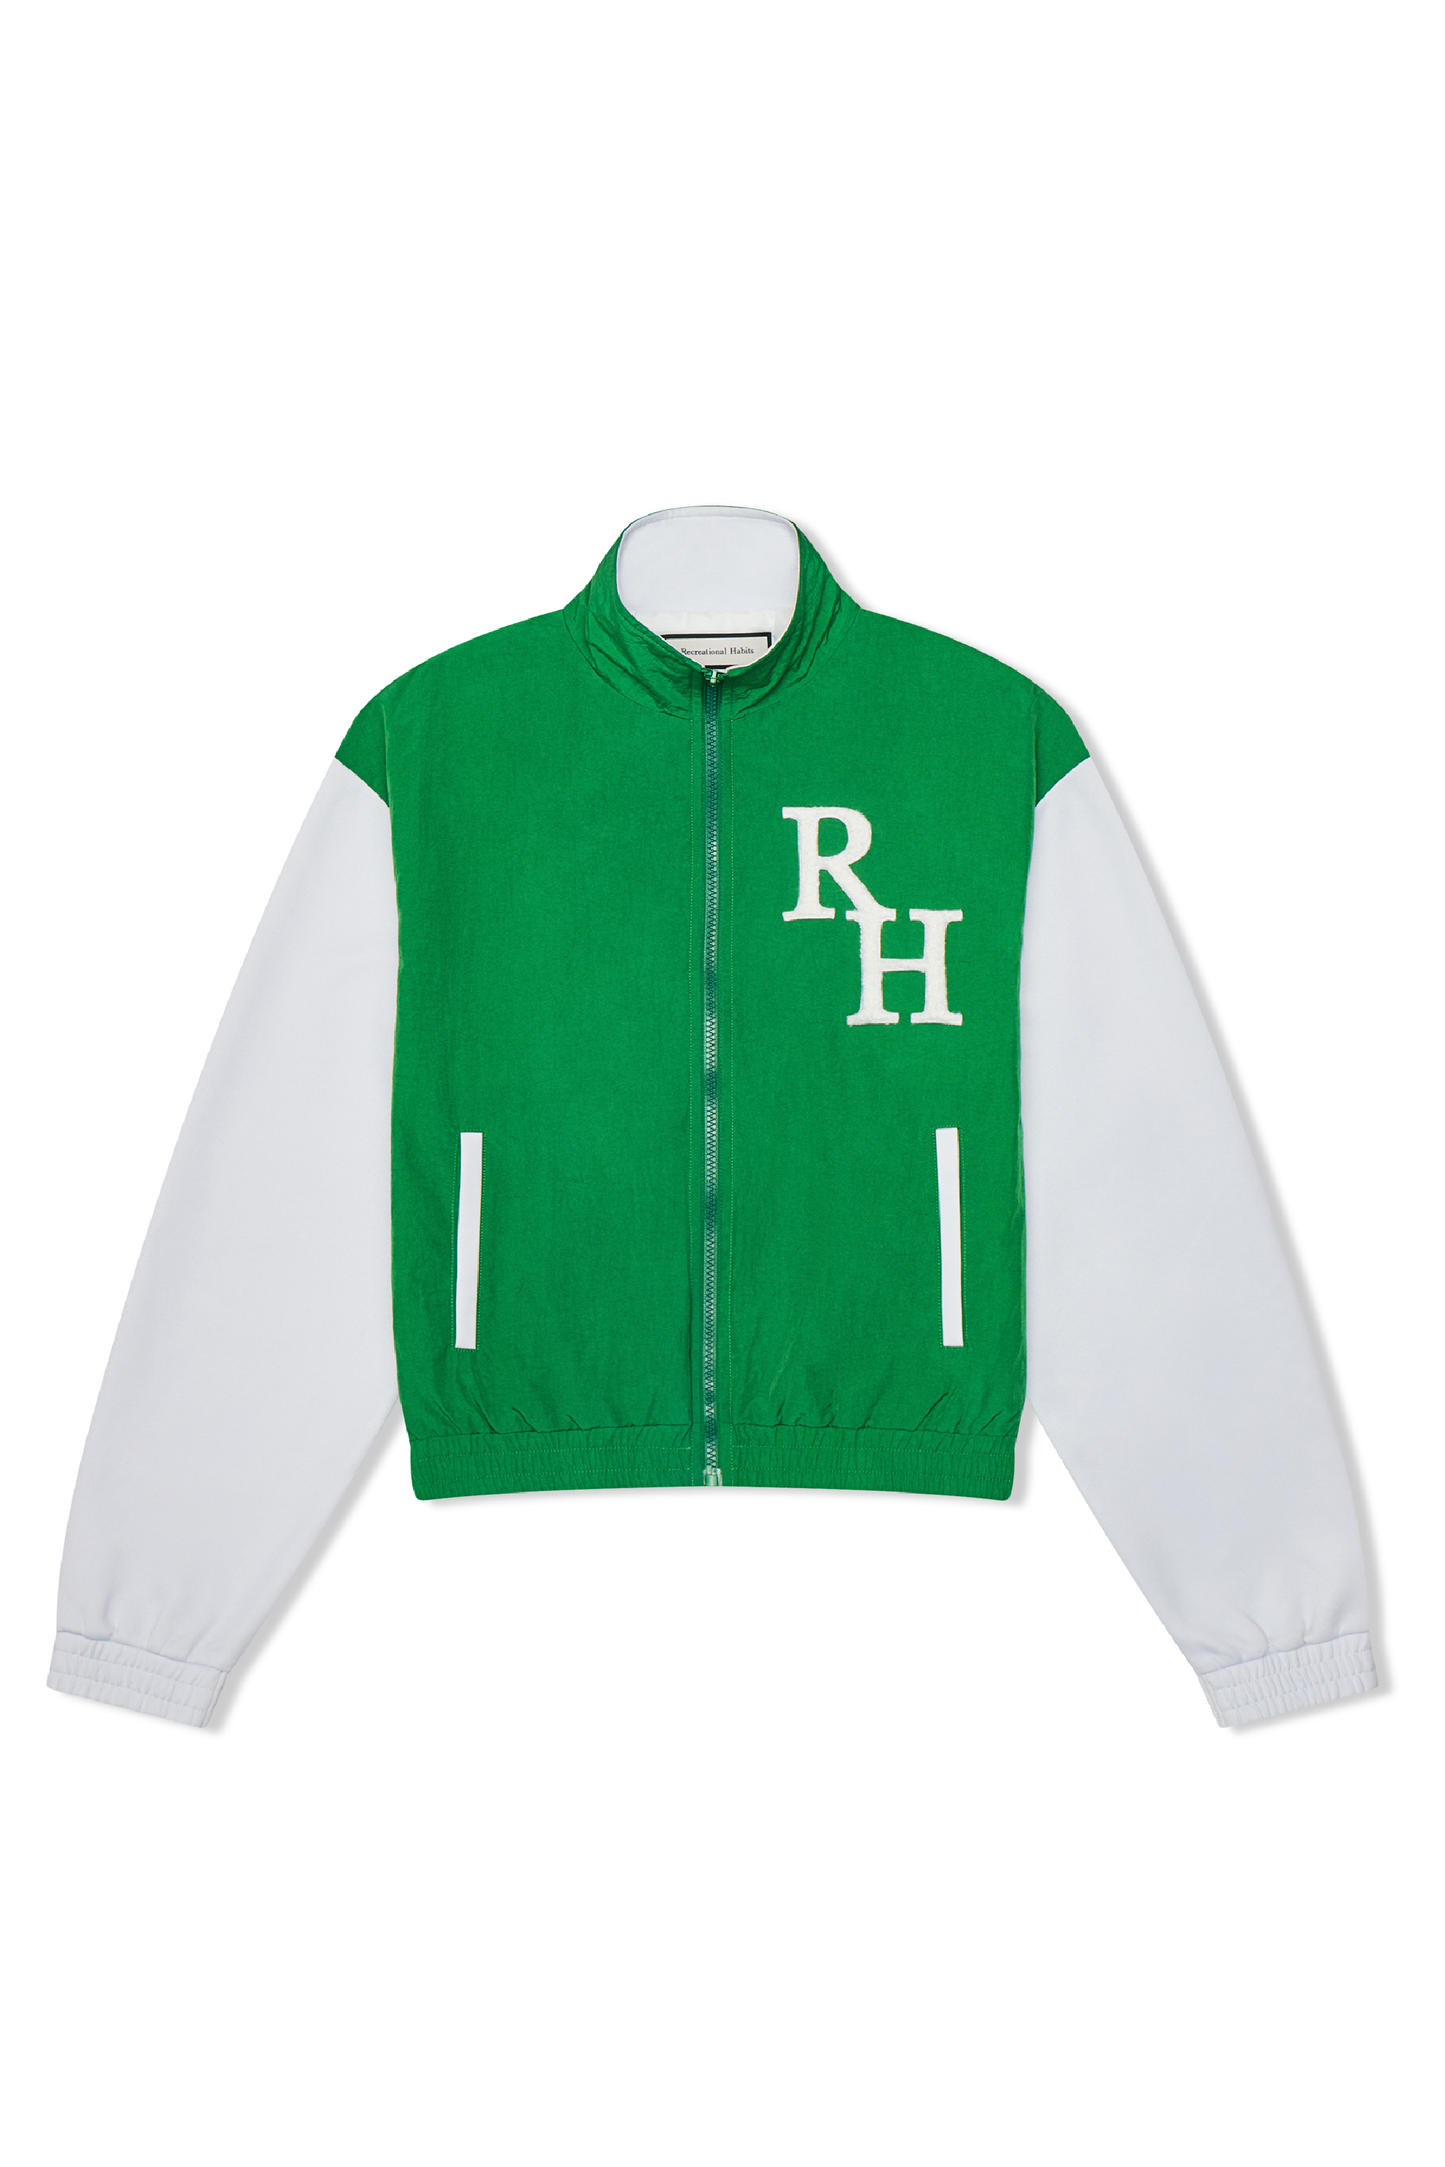 Yale Nylon Jacket in Green and White